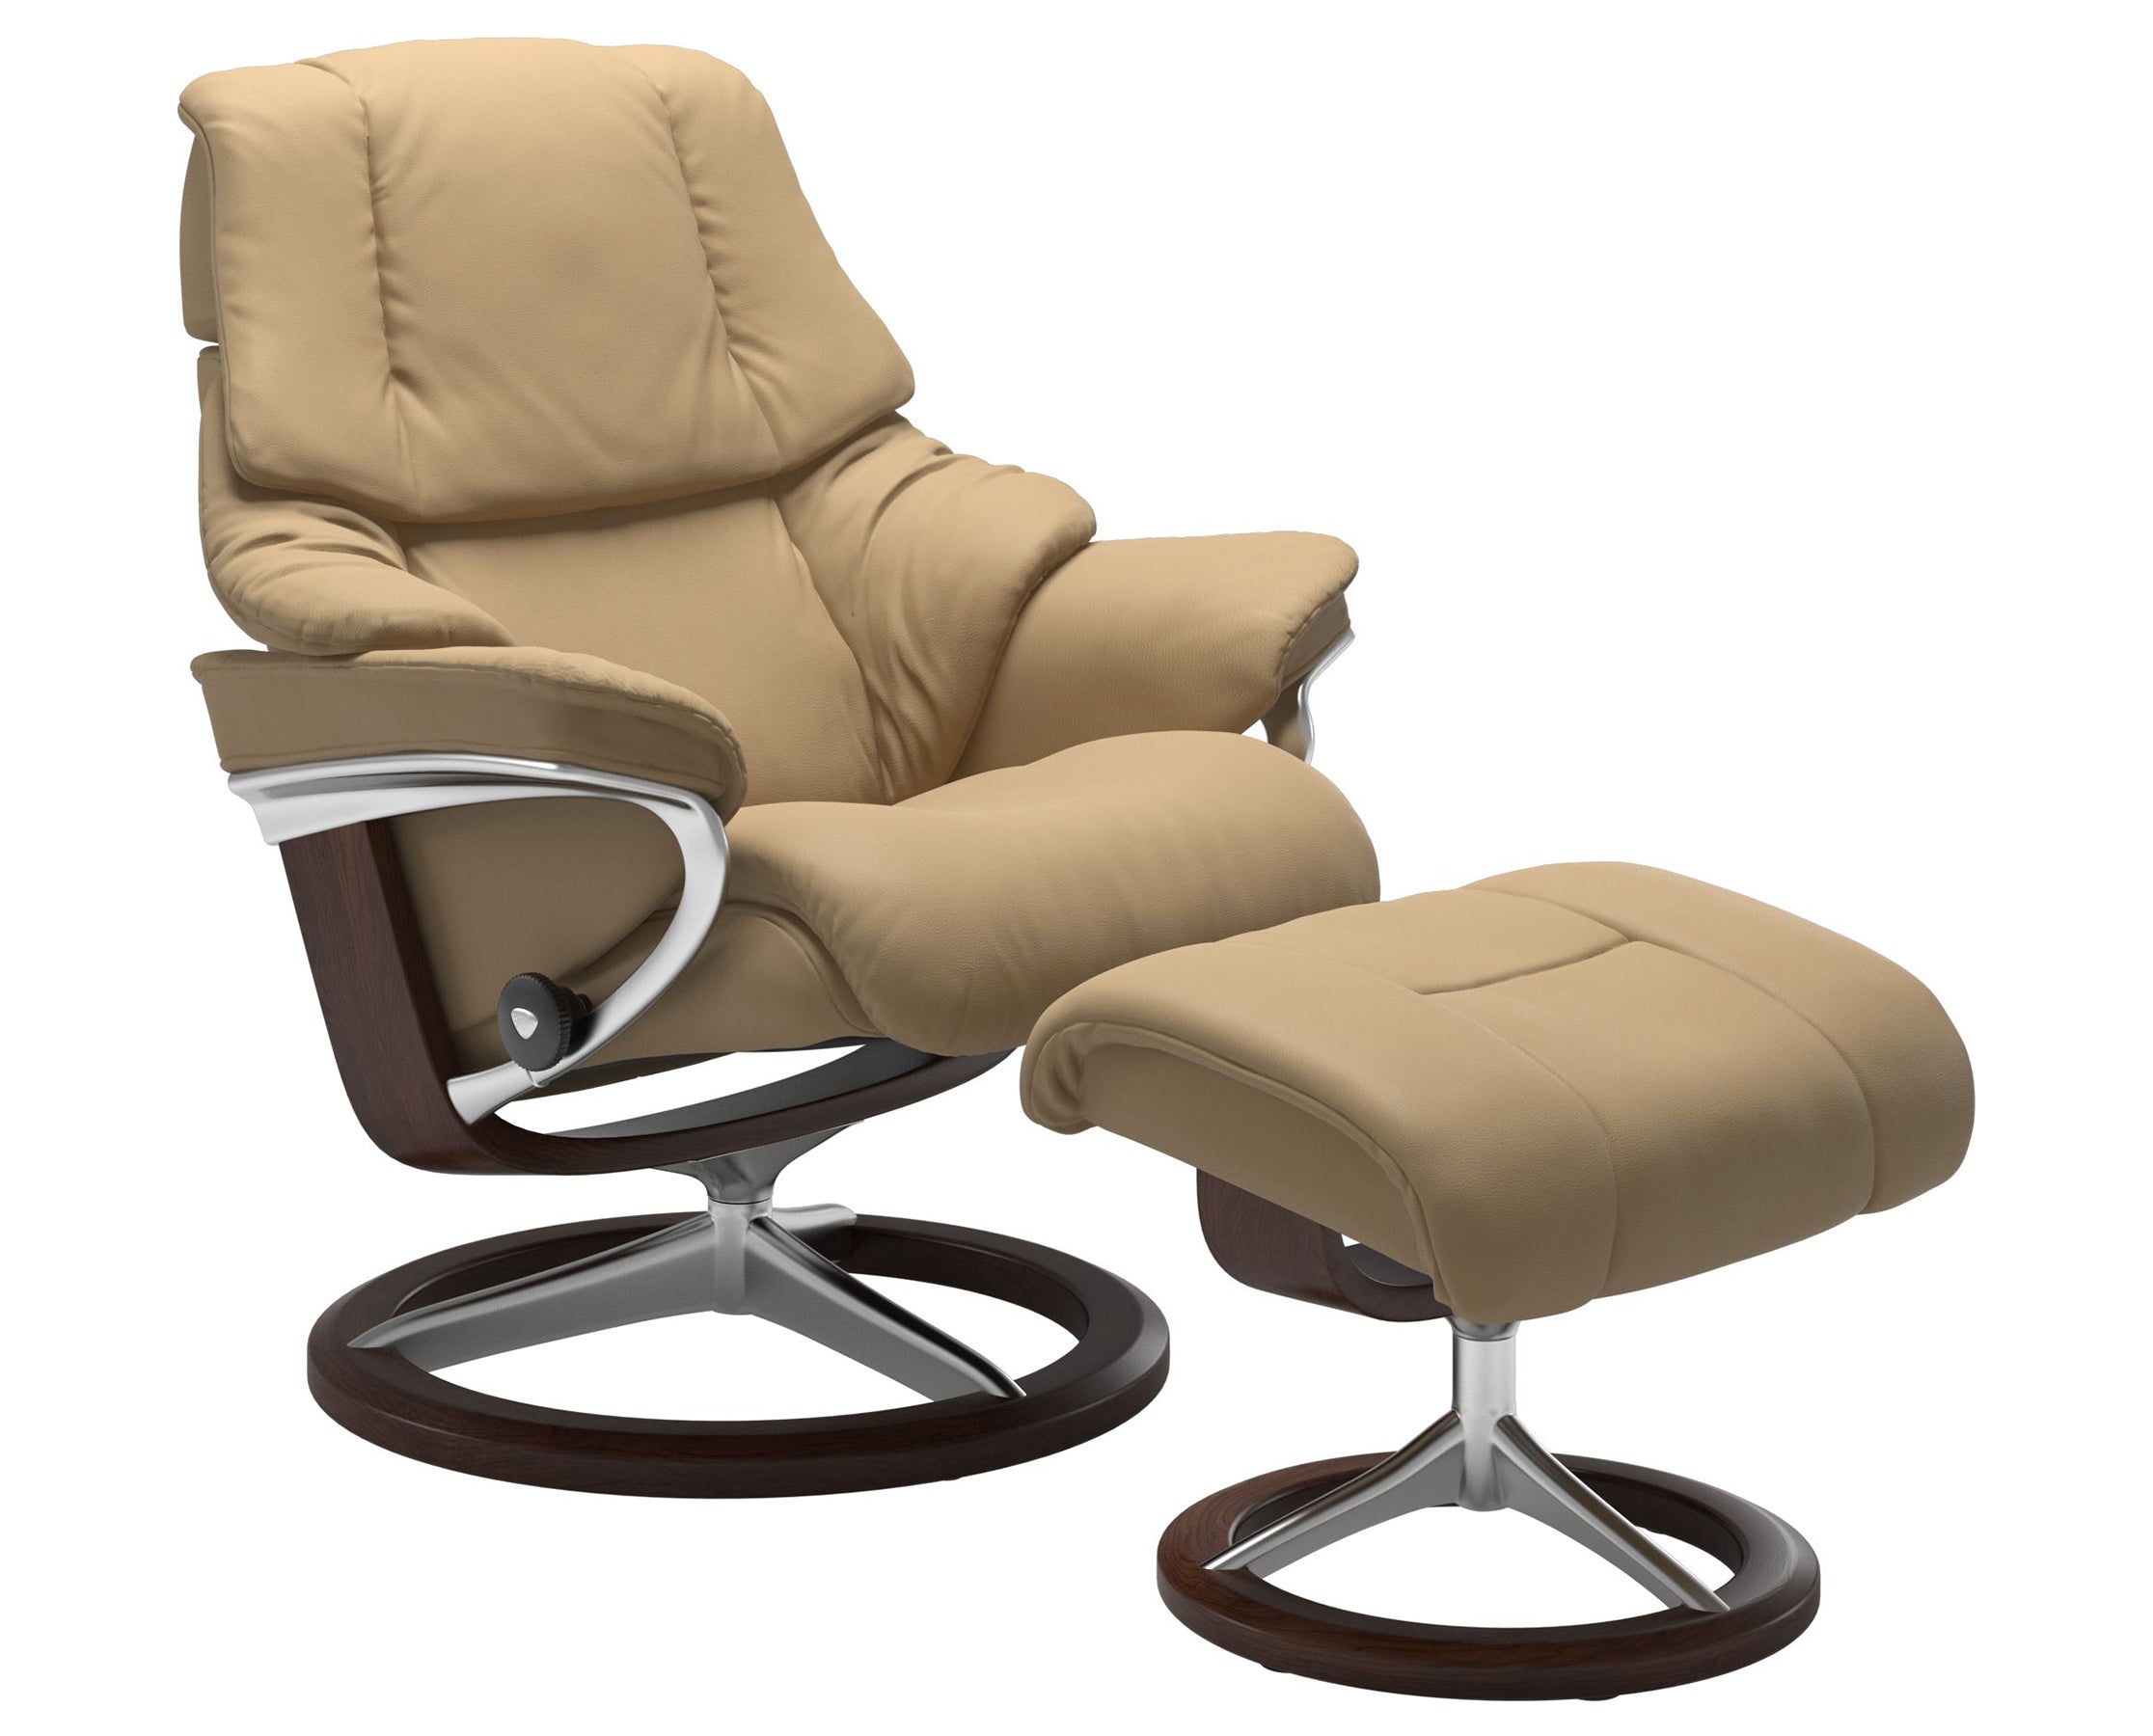 Paloma Leather Sand S/M/L and Brown Base | Stressless Reno Signature Recliner | Valley Ridge Furniture